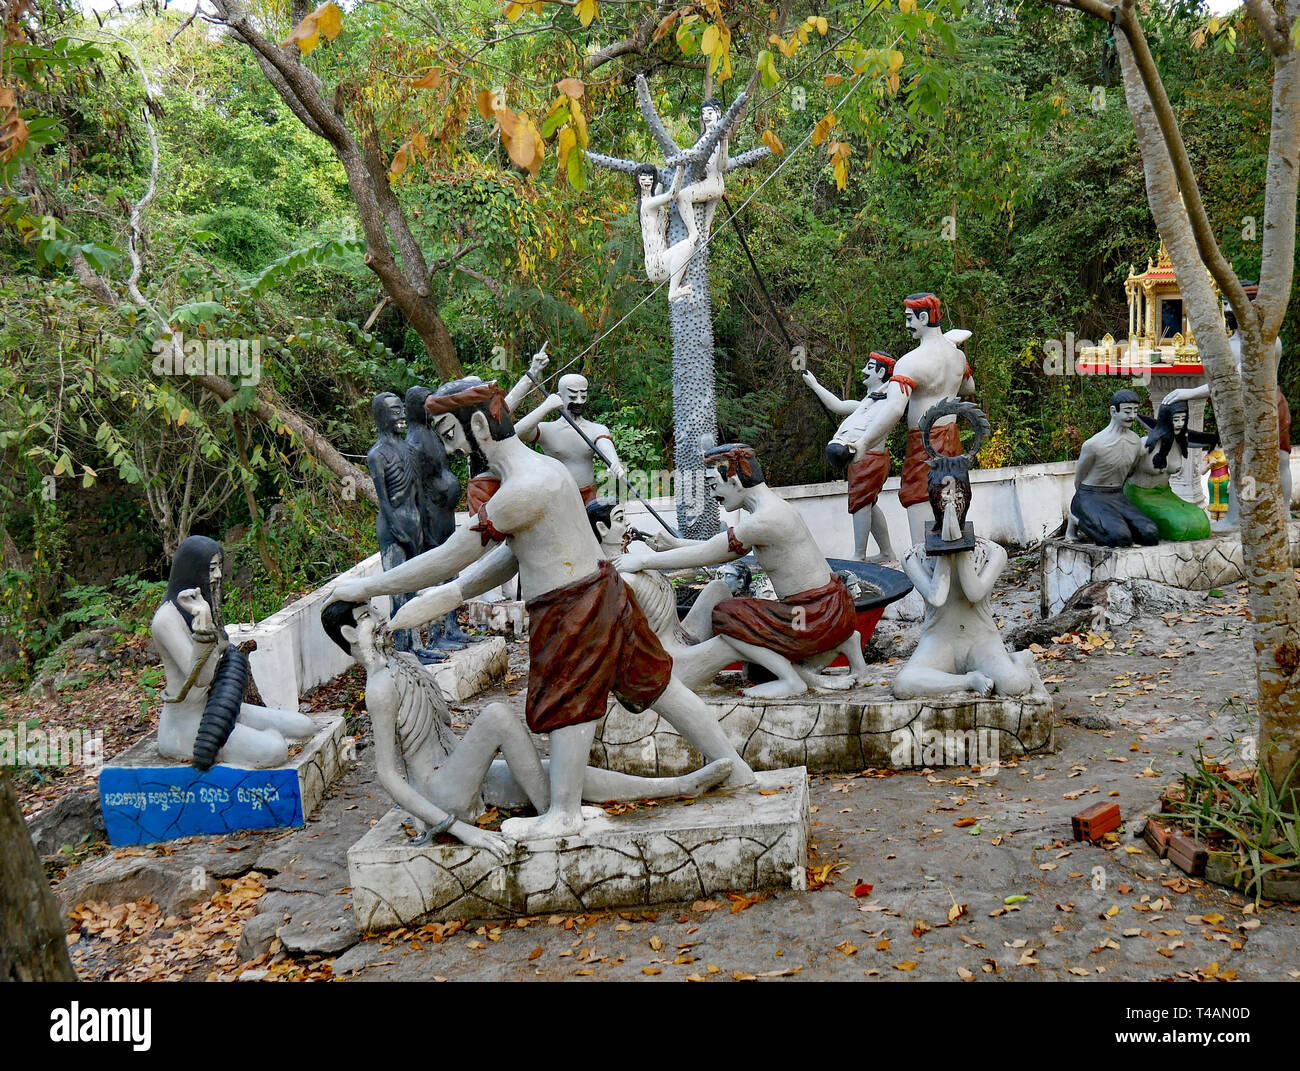 A scene of horror depicting Naraka, Buddhist Hell. Male and female sculptures in a tableau of agony, torture and torment. Cambodia 07-12-2018. Stock Photo